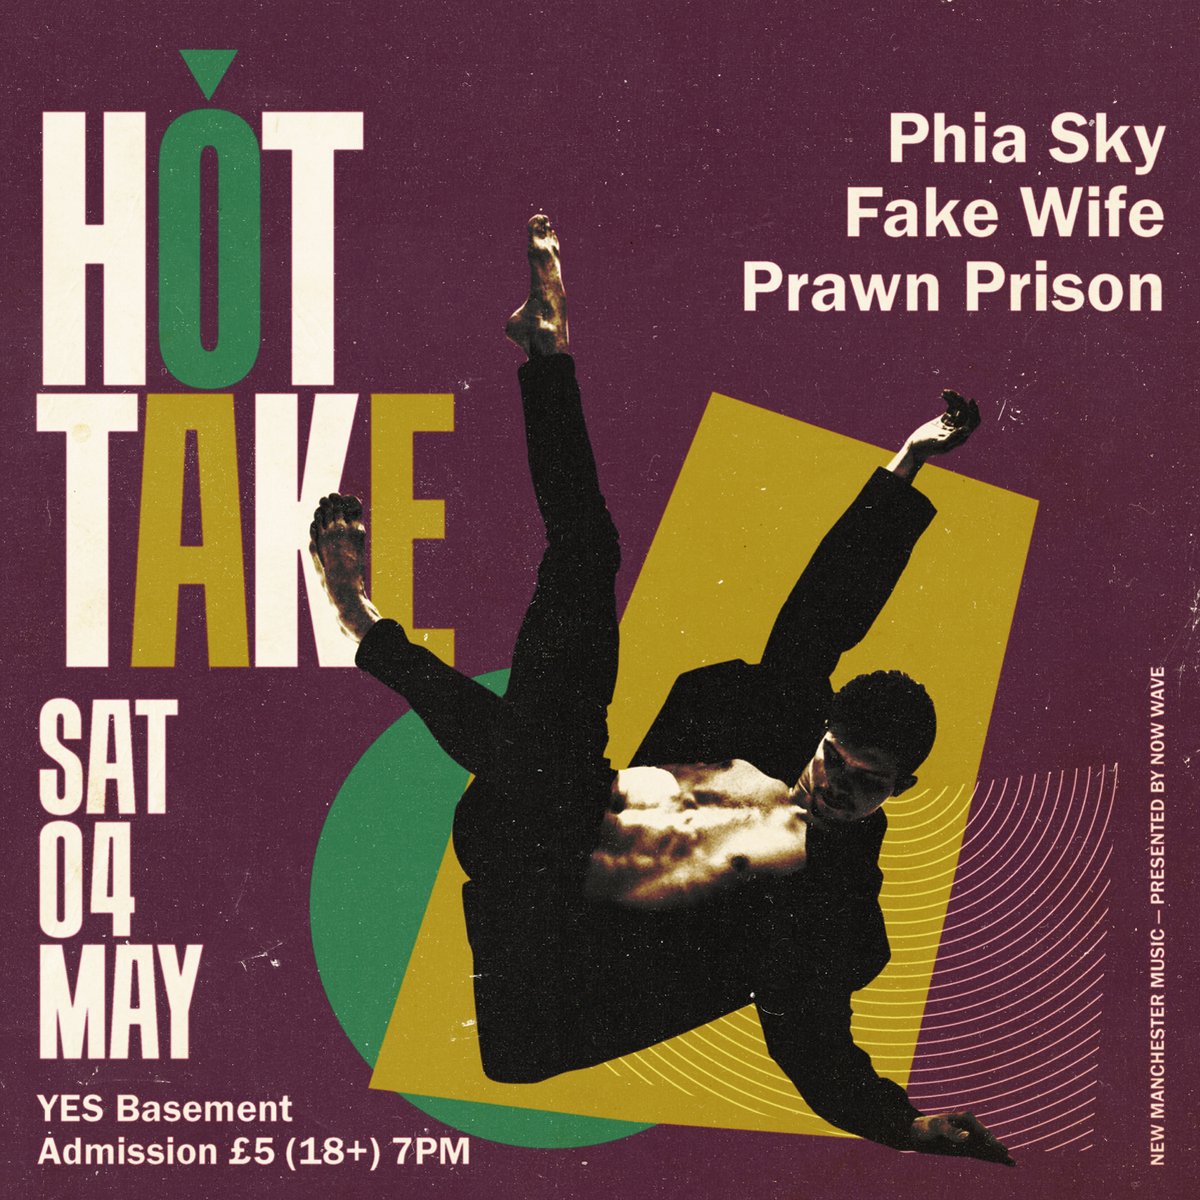 THIS SATURDAY... HOT TAKE returns to YES Basement featuring @phiasky_, FAKE WIFE and Prawn Prison. 3 brand new Manc acts for just £5. Tickets available here -> seetickets.com/event/hot-take…